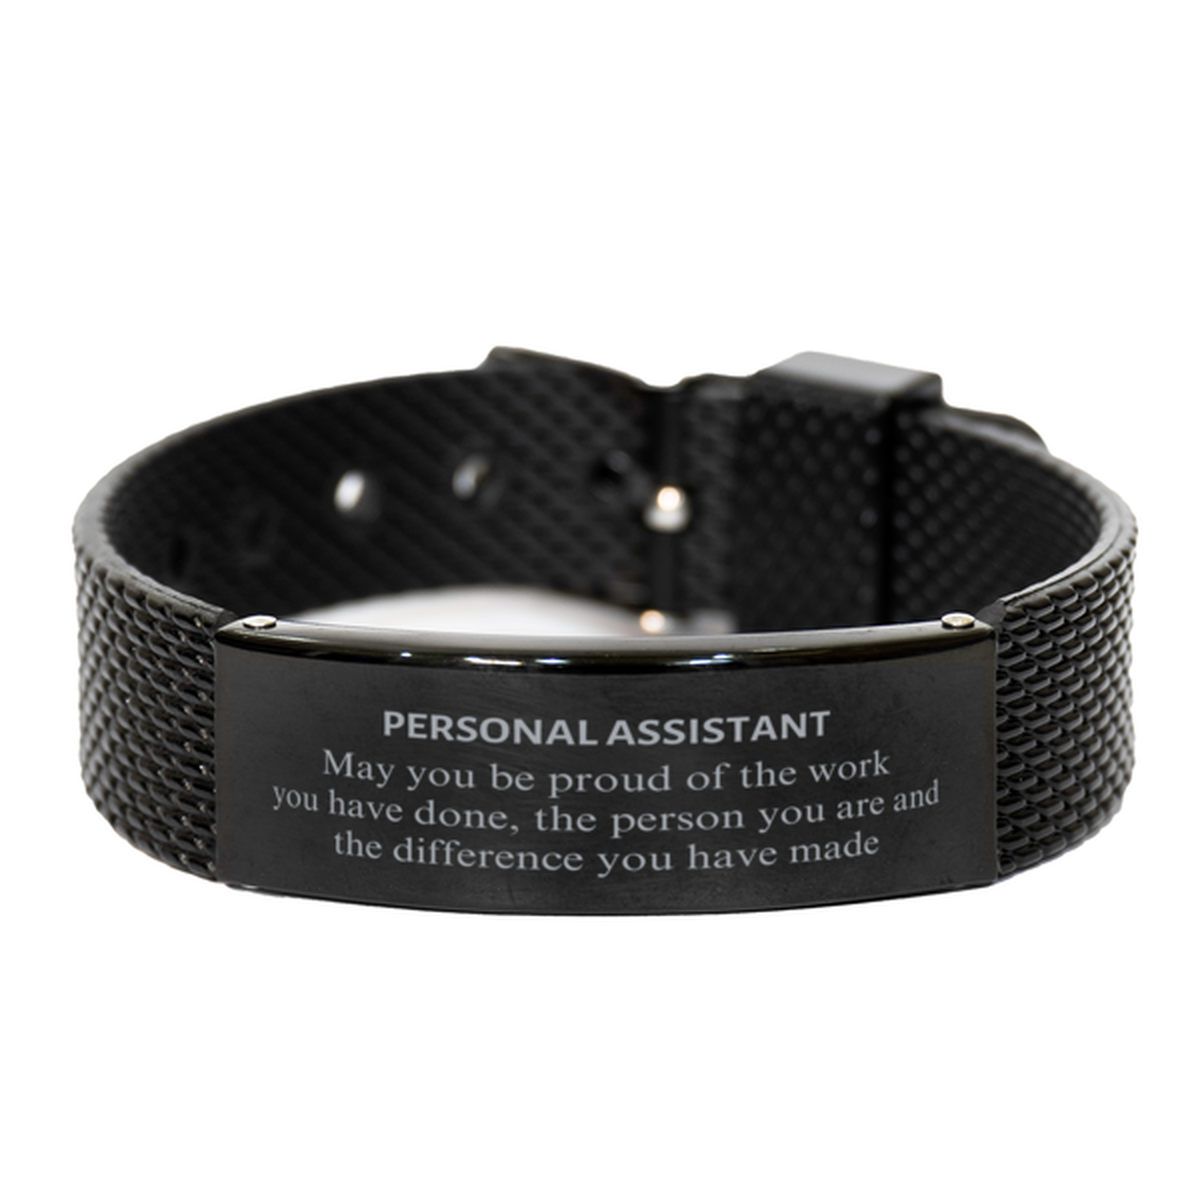 Personal Assistant May you be proud of the work you have done, Retirement Personal Assistant Black Shark Mesh Bracelet for Colleague Appreciation Gifts Amazing for Personal Assistant